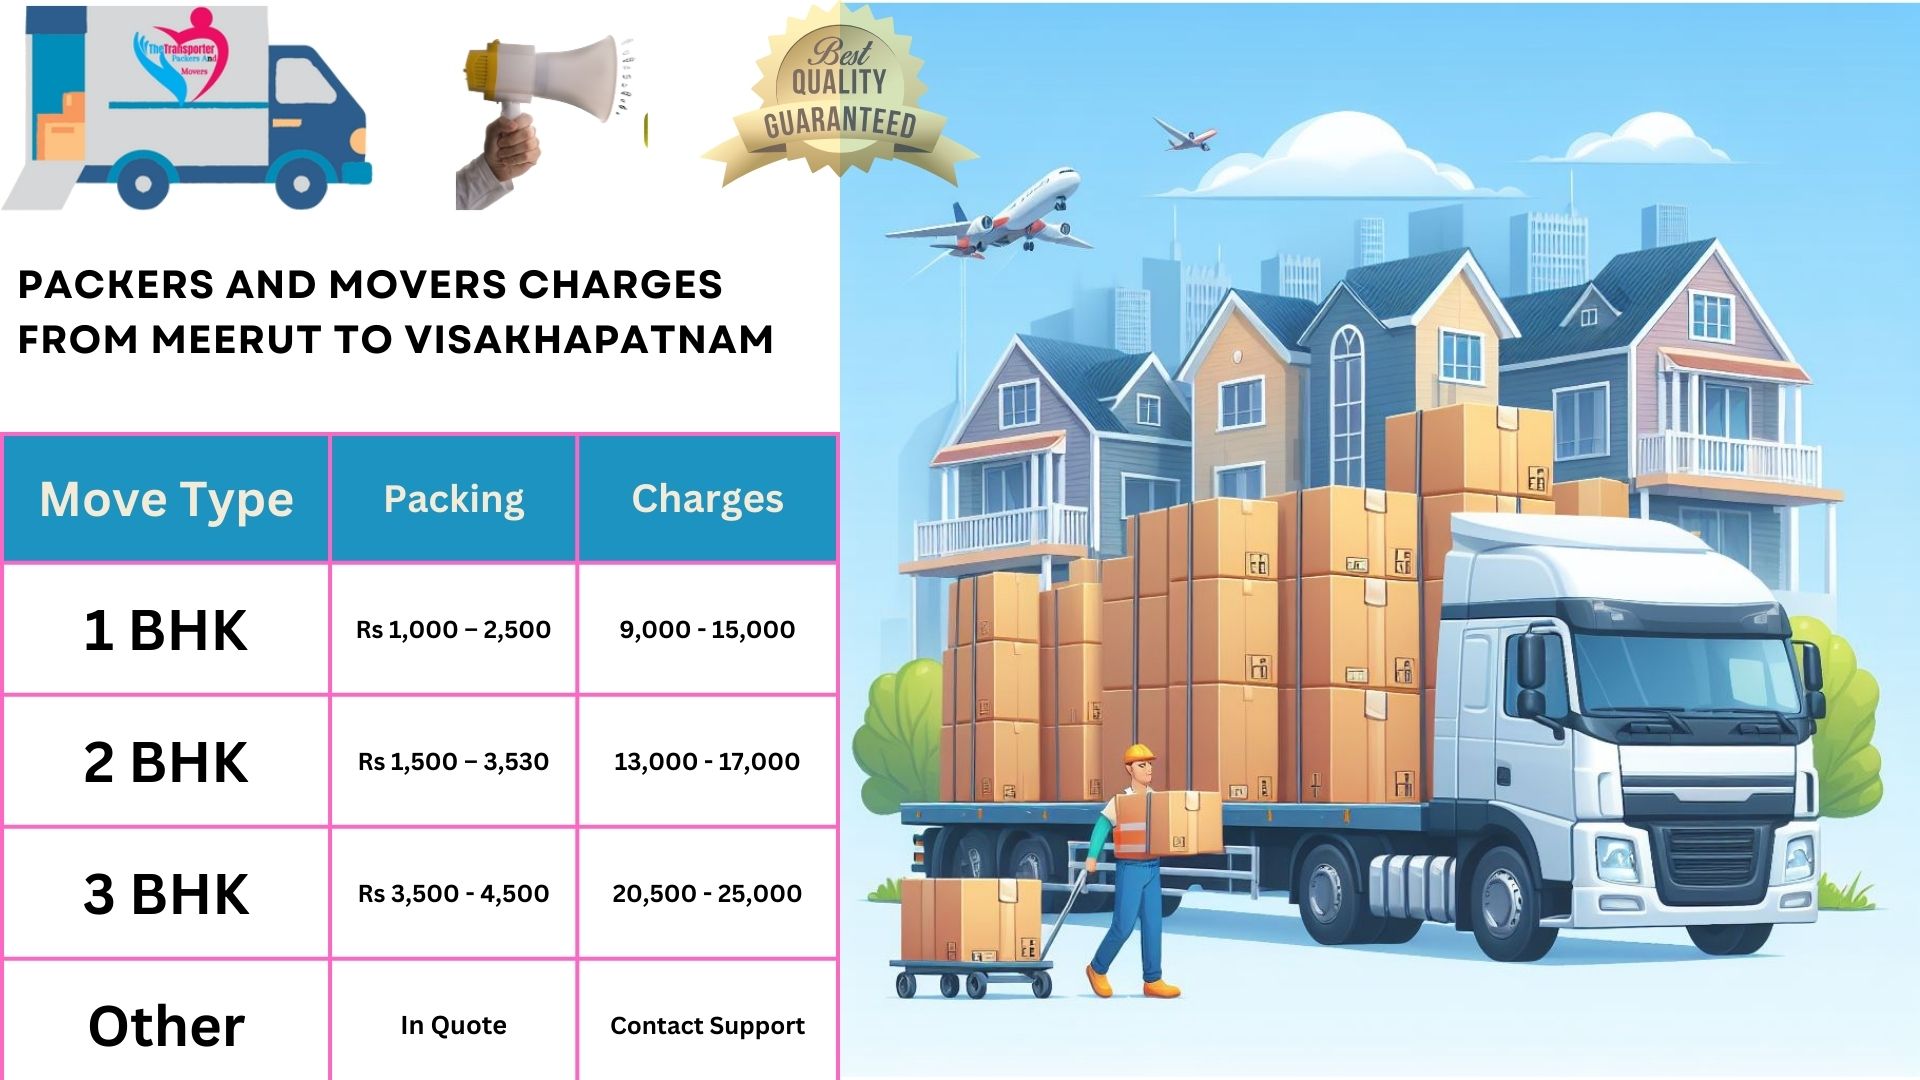 Your household goods shifting from Meerut to Visakhapatnam